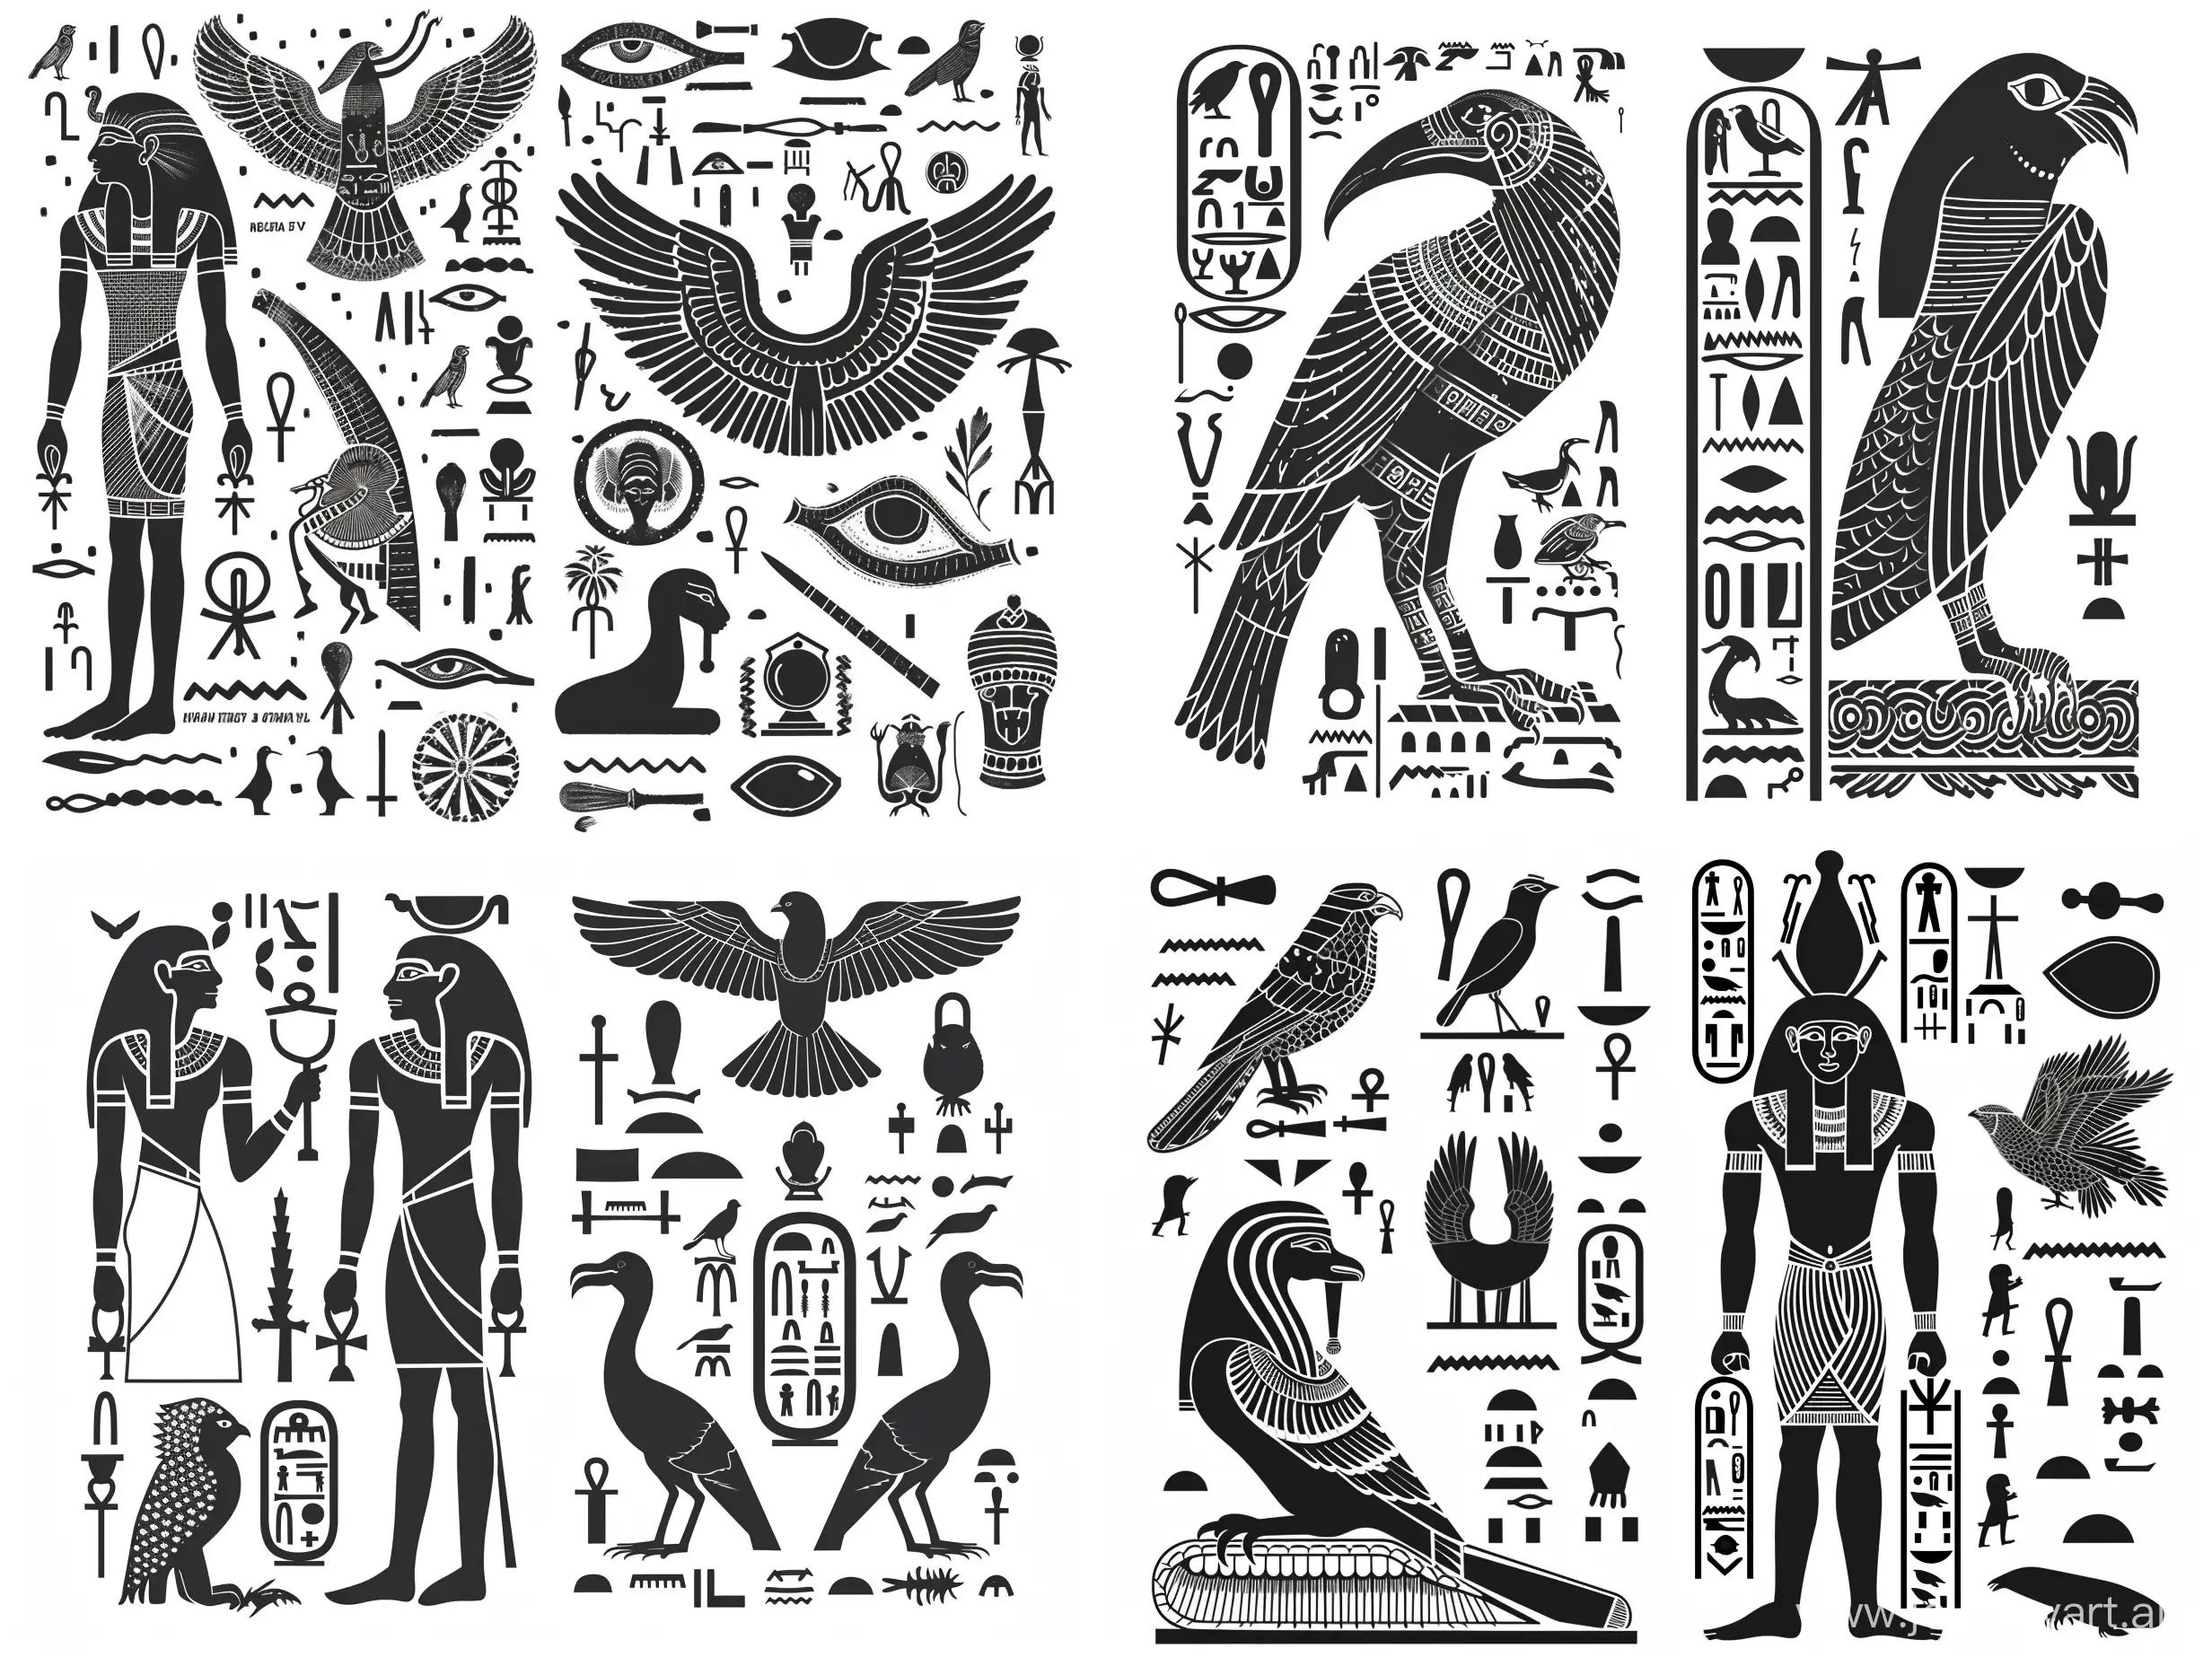 Ancient-Egyptian-Symbols-Vector-Art-Detailed-Stylized-Caricature-in-Black-and-White